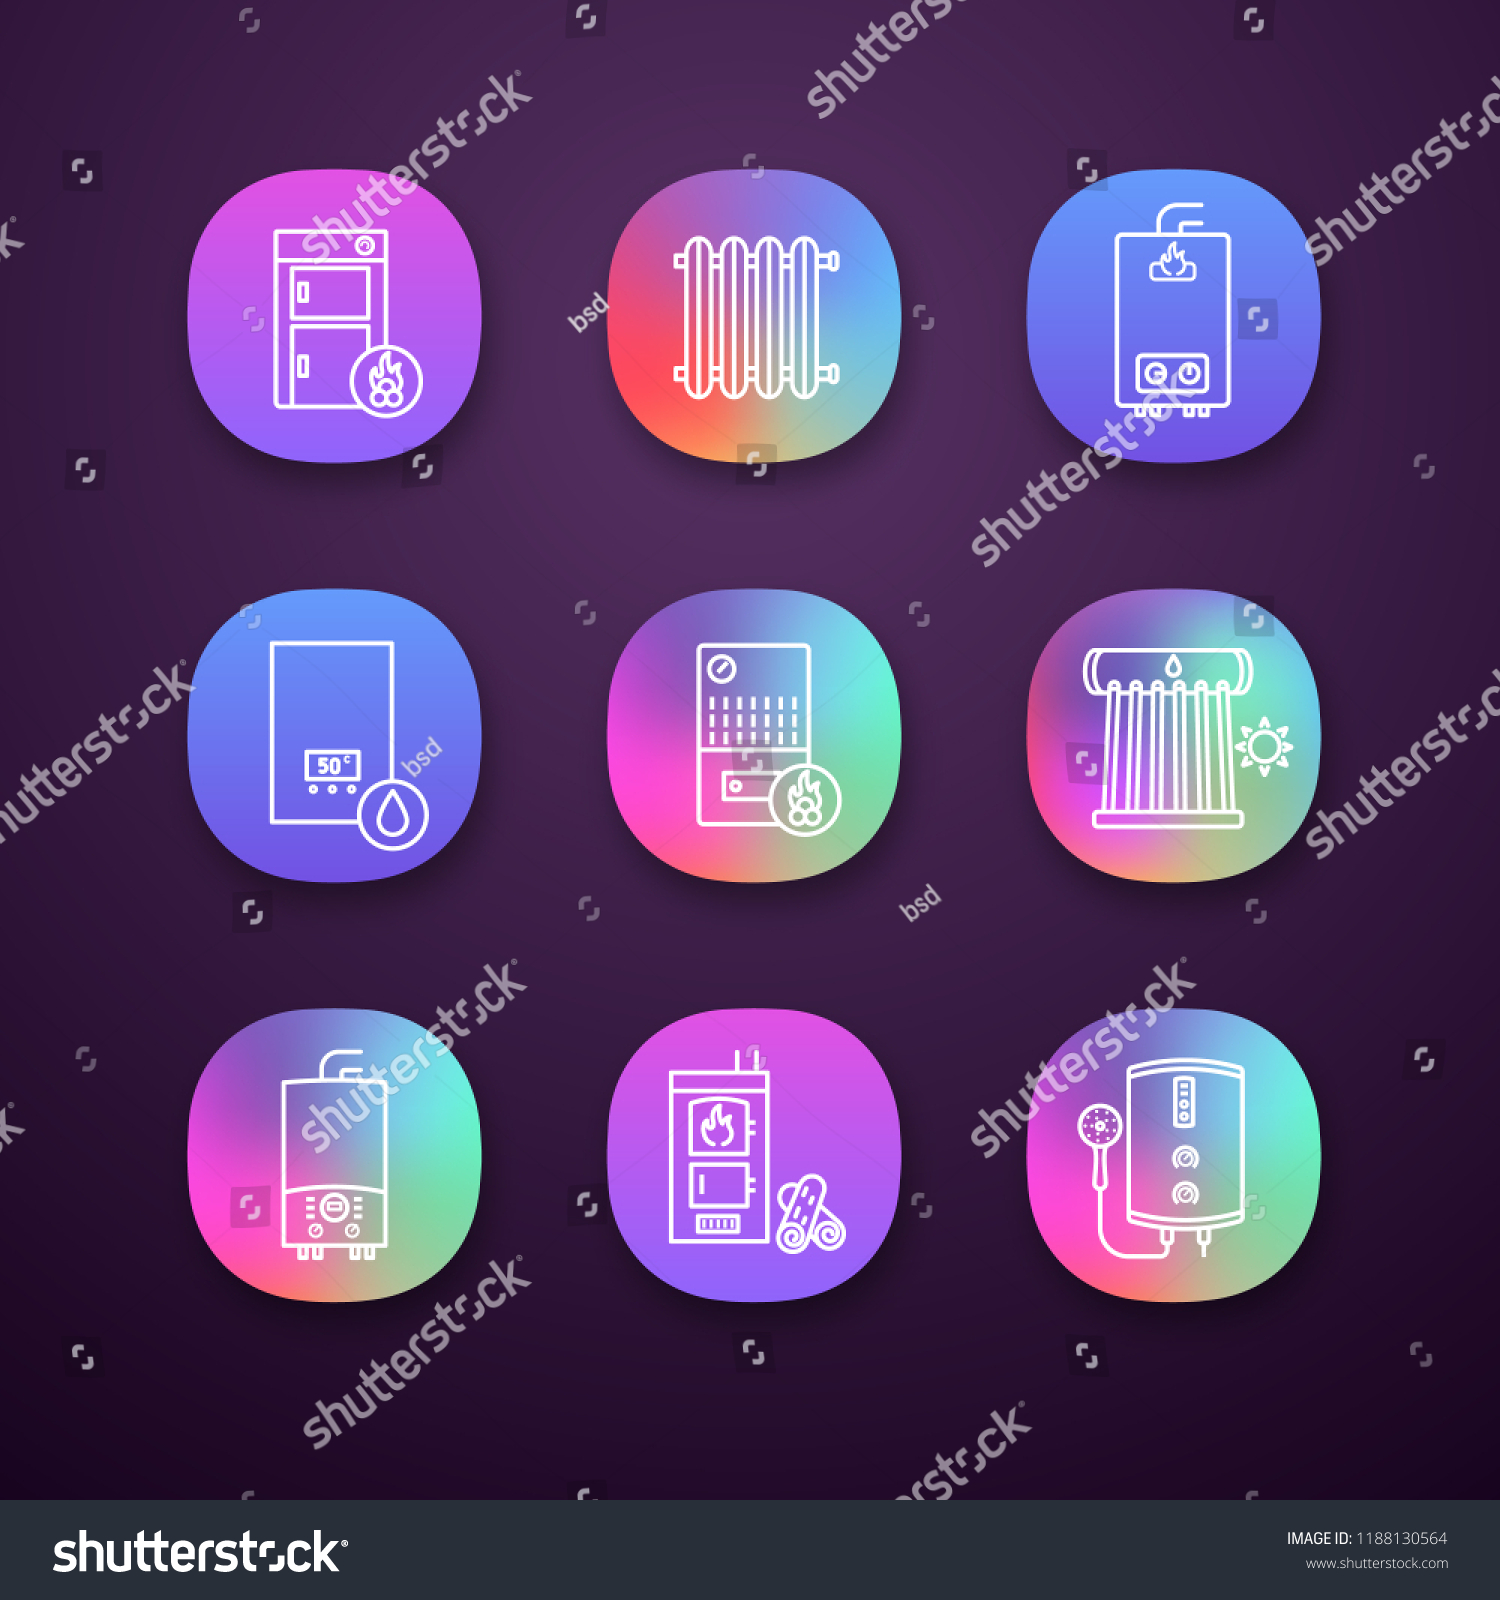 Heating app icons set. UI/UX interface. Boilers, radiators, water heaters. Gas, electric, solid fuel, pellet, boilers. Commercial, industrial and domestic central heating systems. Vector illustrations #1188130564